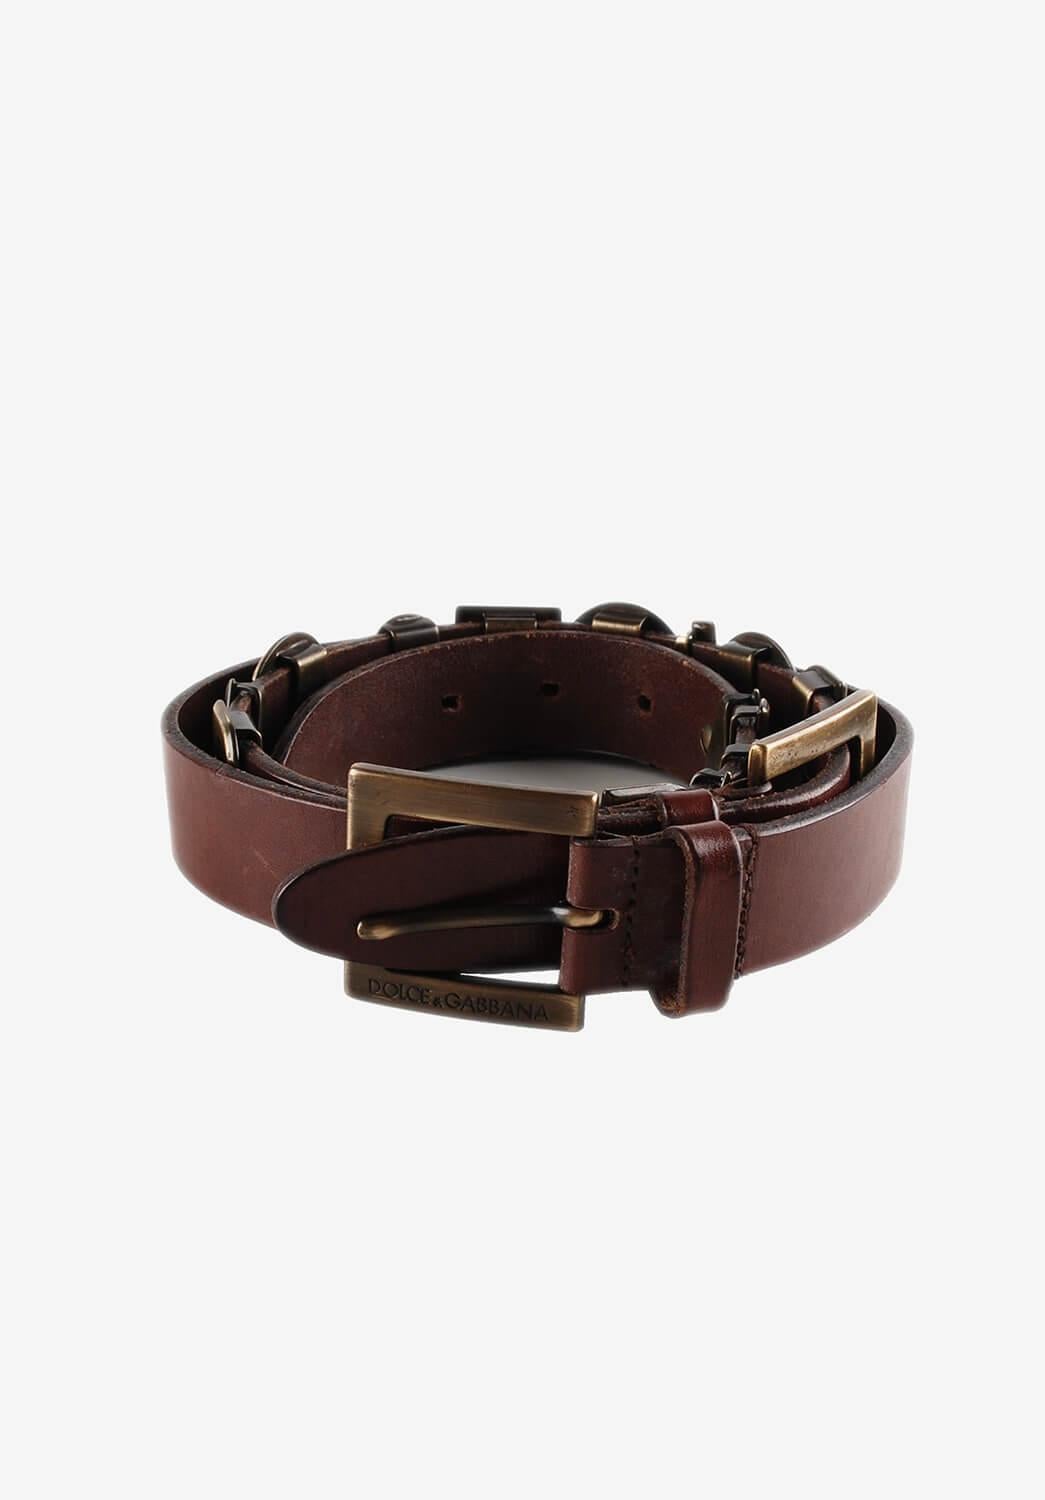 Item for sale is 100% genuine Dolce&Gabbana Leather Men Belt 
Color: Brown
(An actual color may a bit vary due to individual computer screen interpretation)
Material: Leather
Tag size: 100 (Large)
This belt is great quality item. Rate 8.5 of 10,